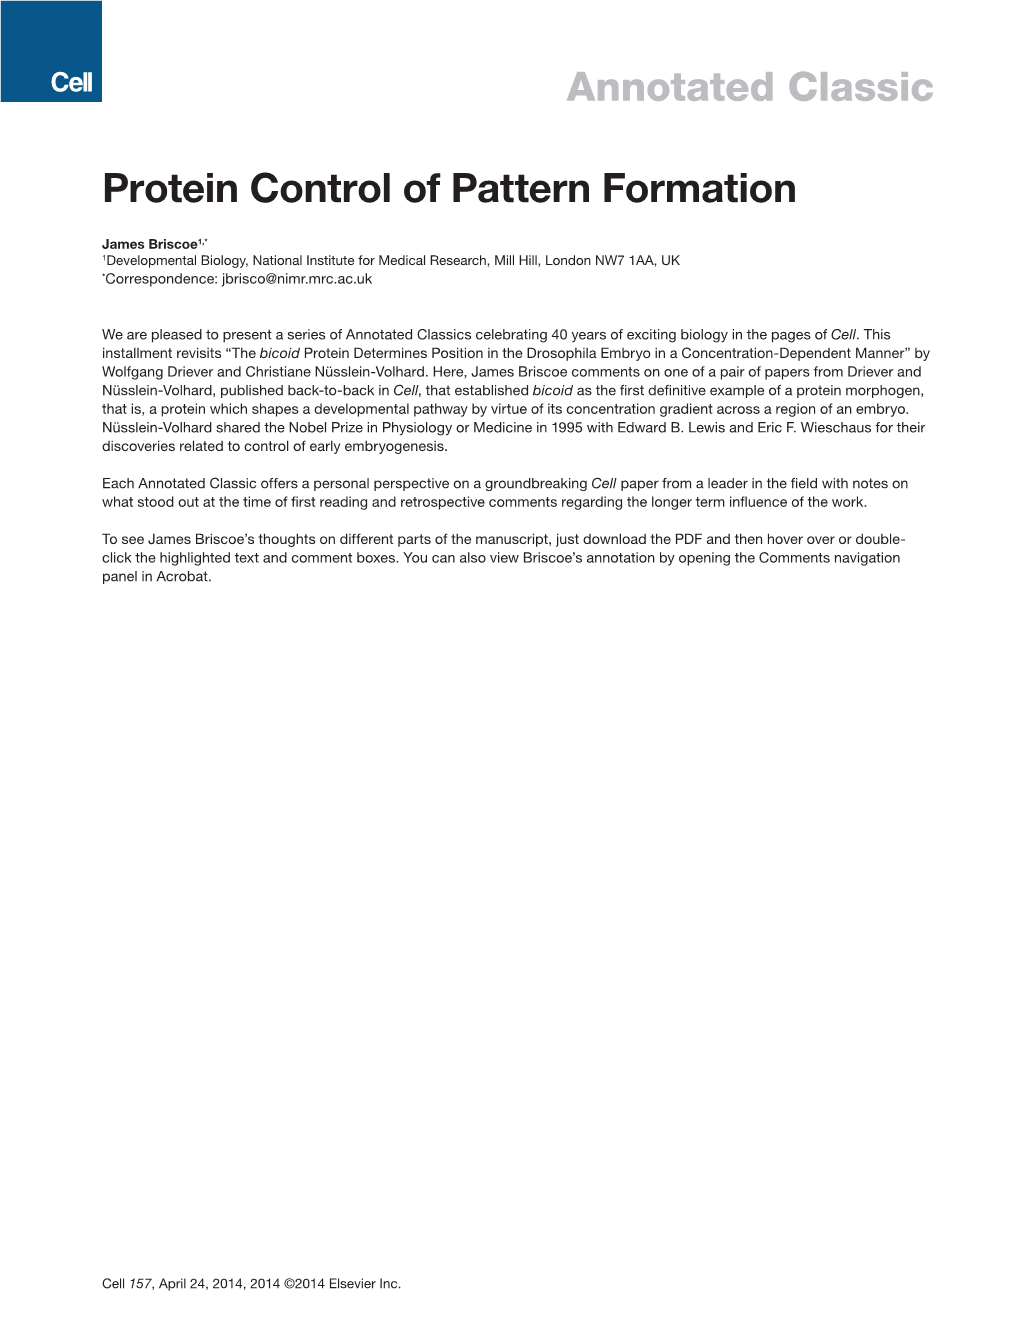 Annotated Classic Protein Control of Pattern Formation